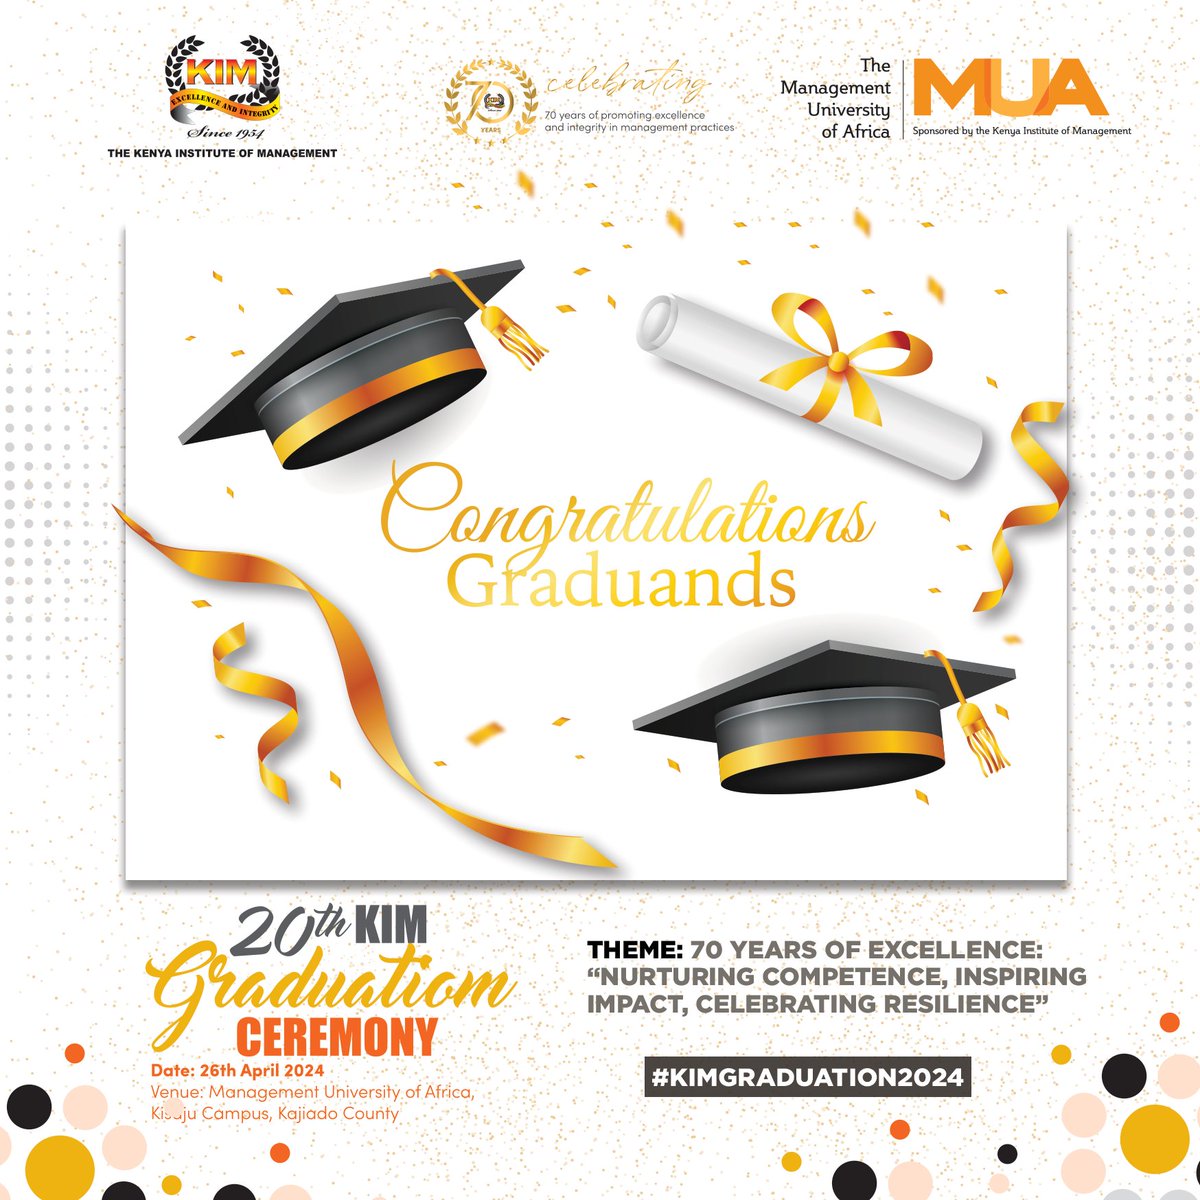 The D-DAY!!!!! As you step onto the stage and receive your certificates, know that you have achieved something truly remarkable. Embrace this milestone with pride and celebrate your success to the fullest.🎉👏 Congratulations!! #KIMGraduation2024